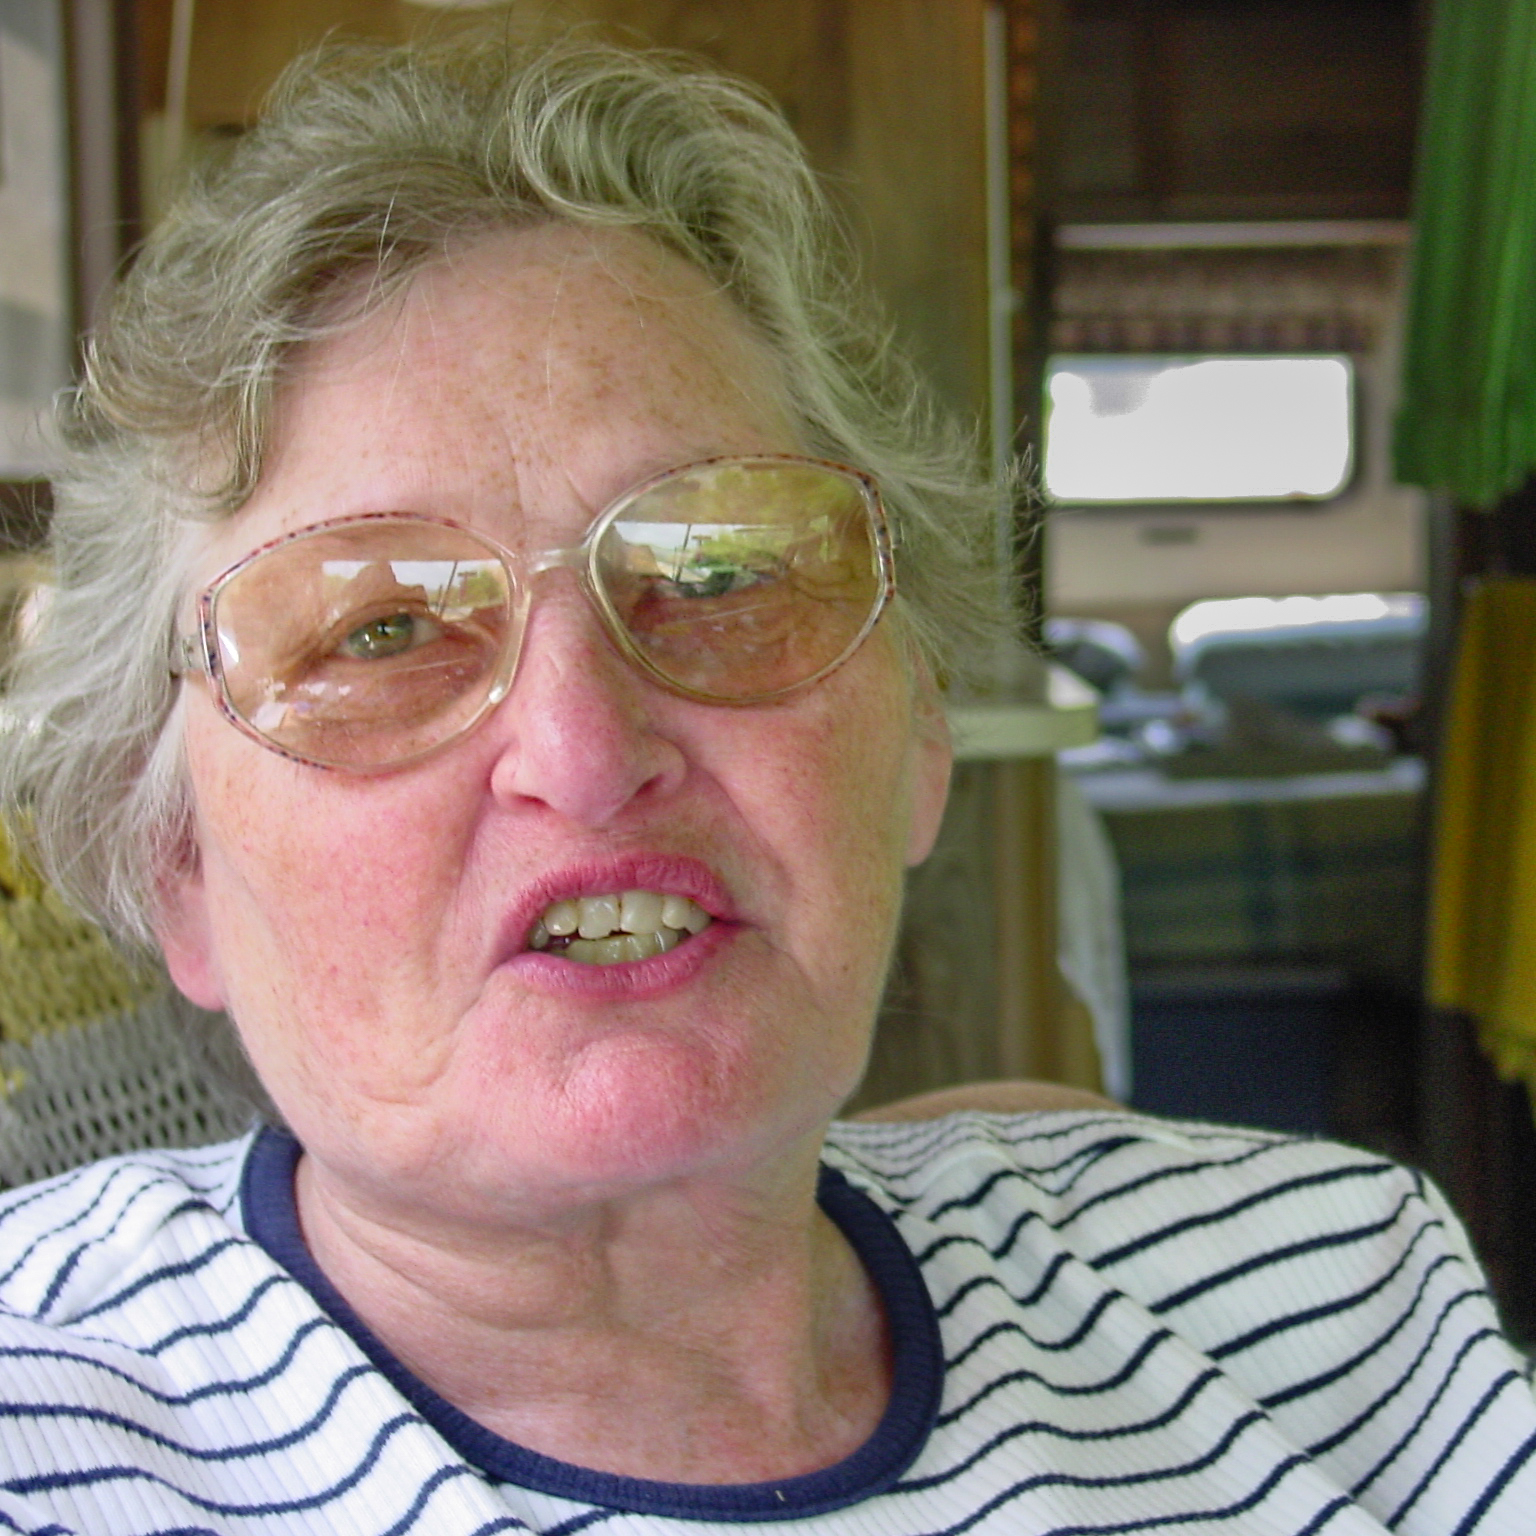 Woman with glasses talking